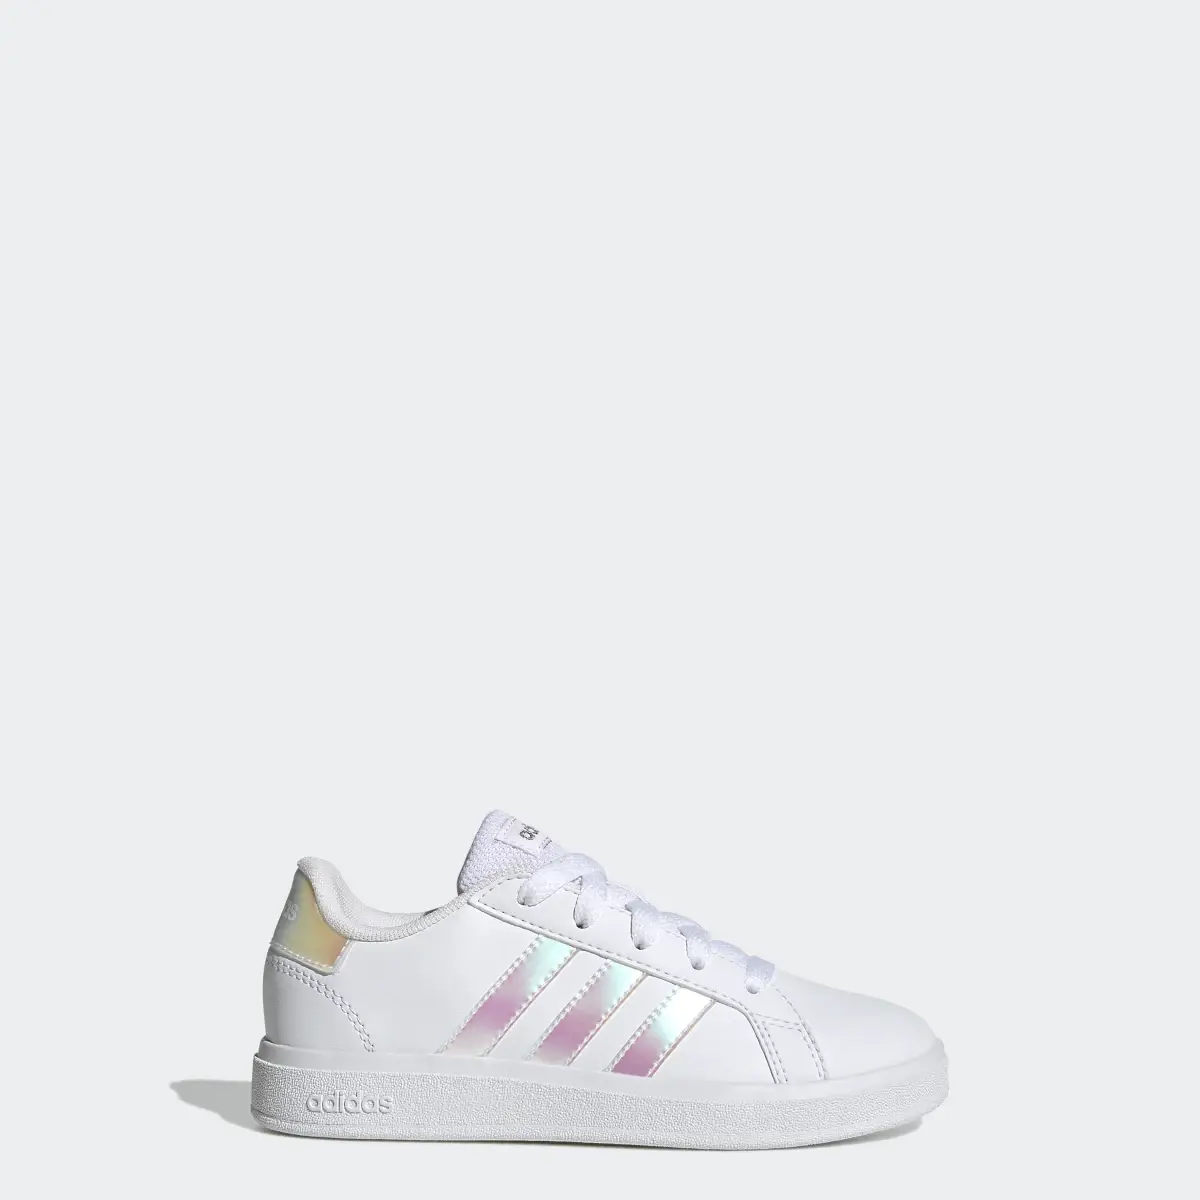 Adidas Grand Court Lifestyle Lace Tennis Schuh. 1